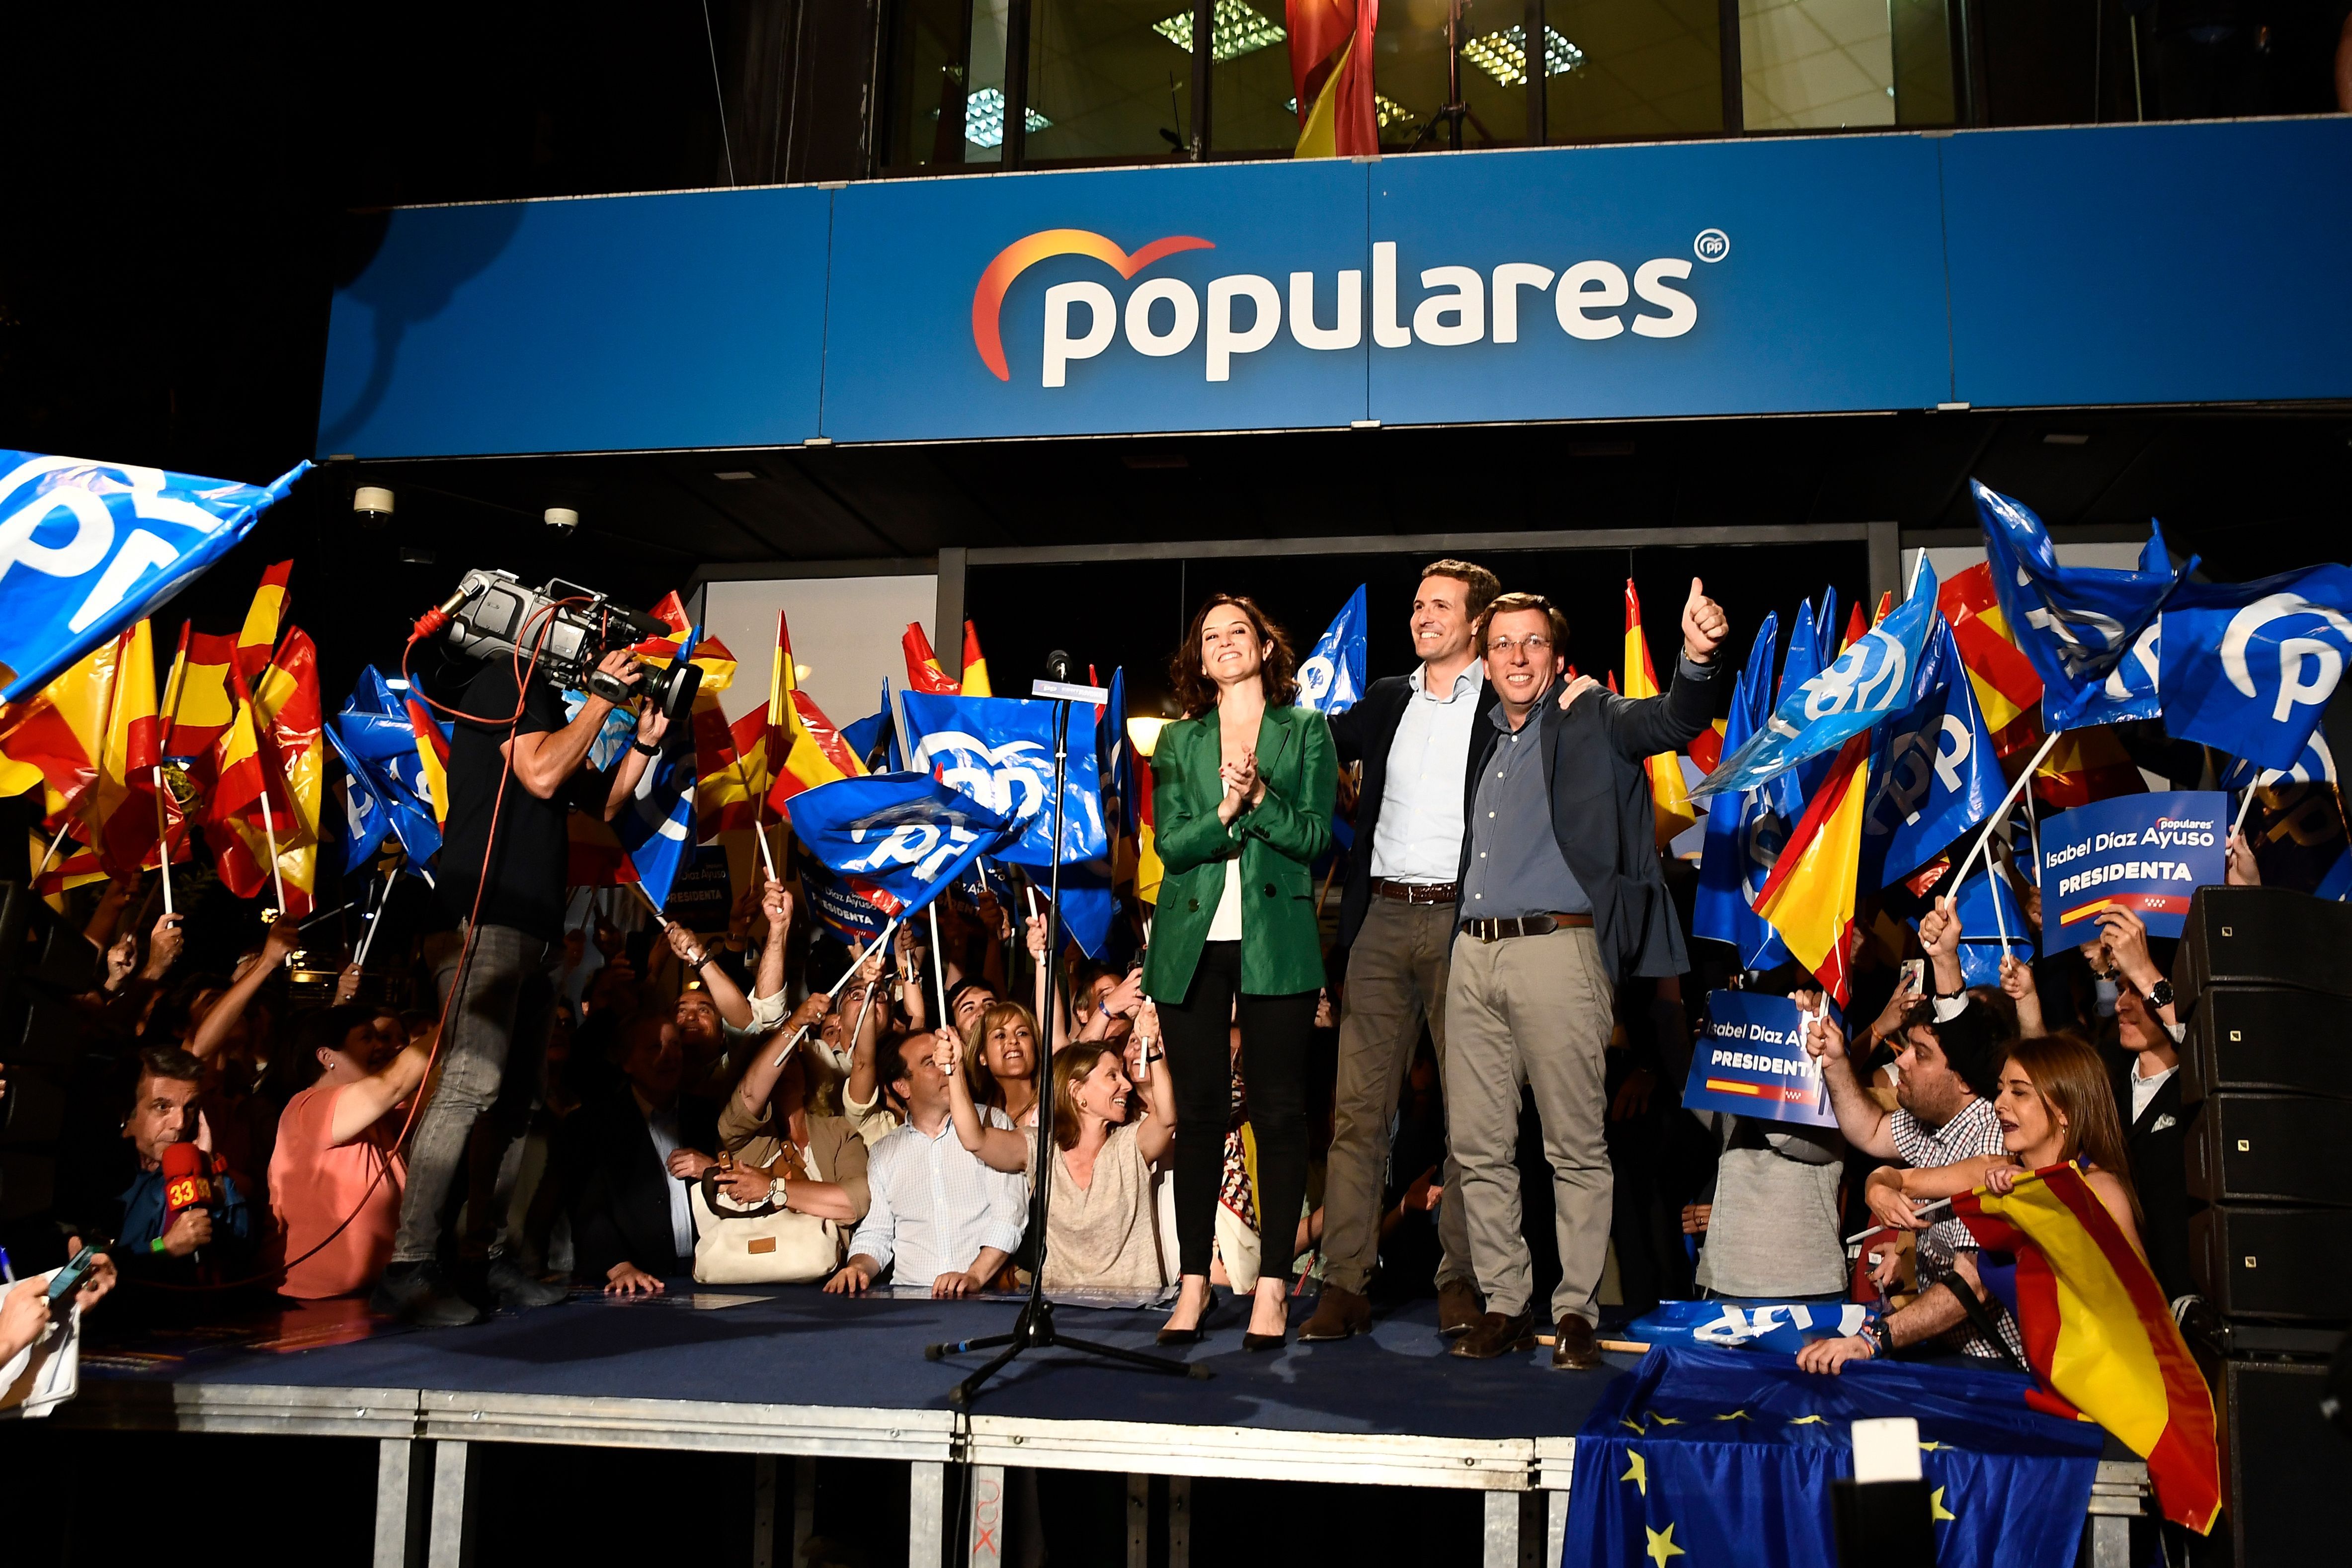 Leader of Spanish People's Party (PP), conservative Pablo Casado (C), celebrates the election results.